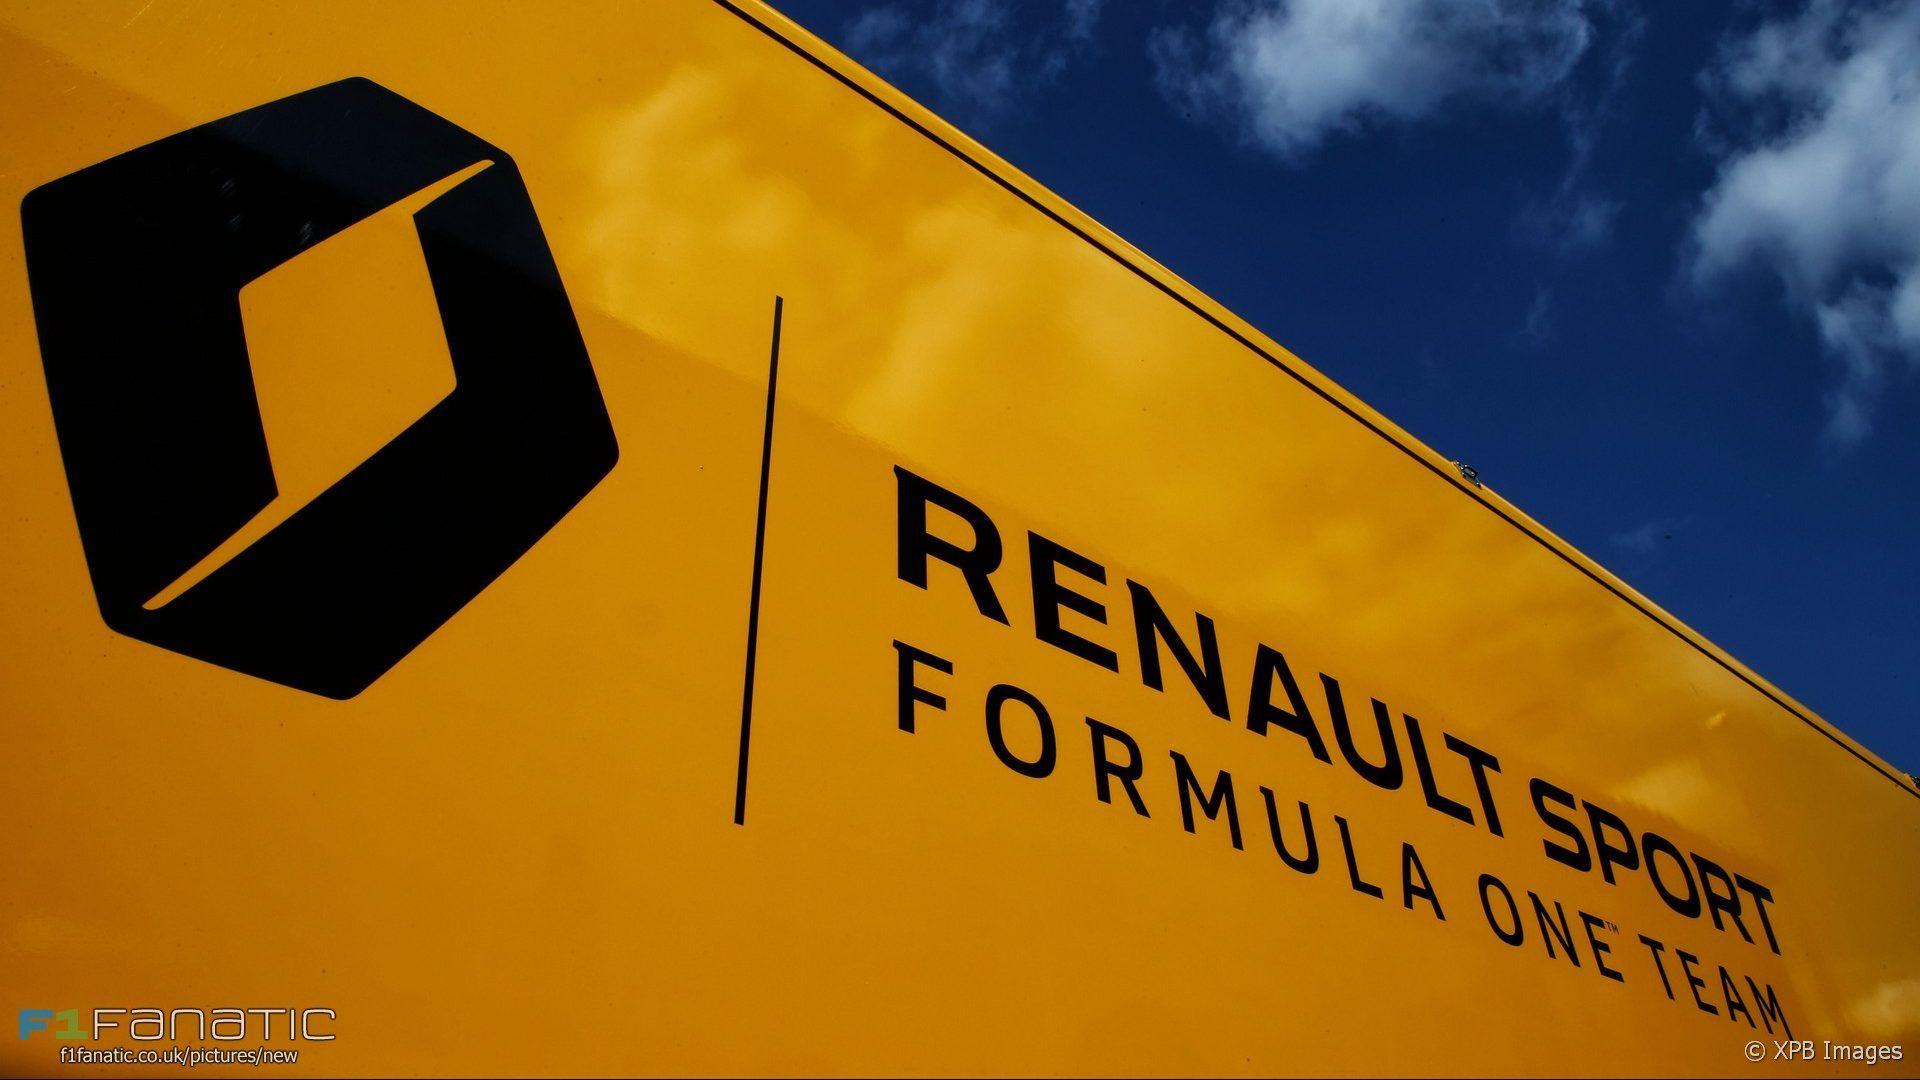 Renault F1 2018 Logo - McLaren confirms three-year Renault engine deal for 2018 - F1 Fanatic